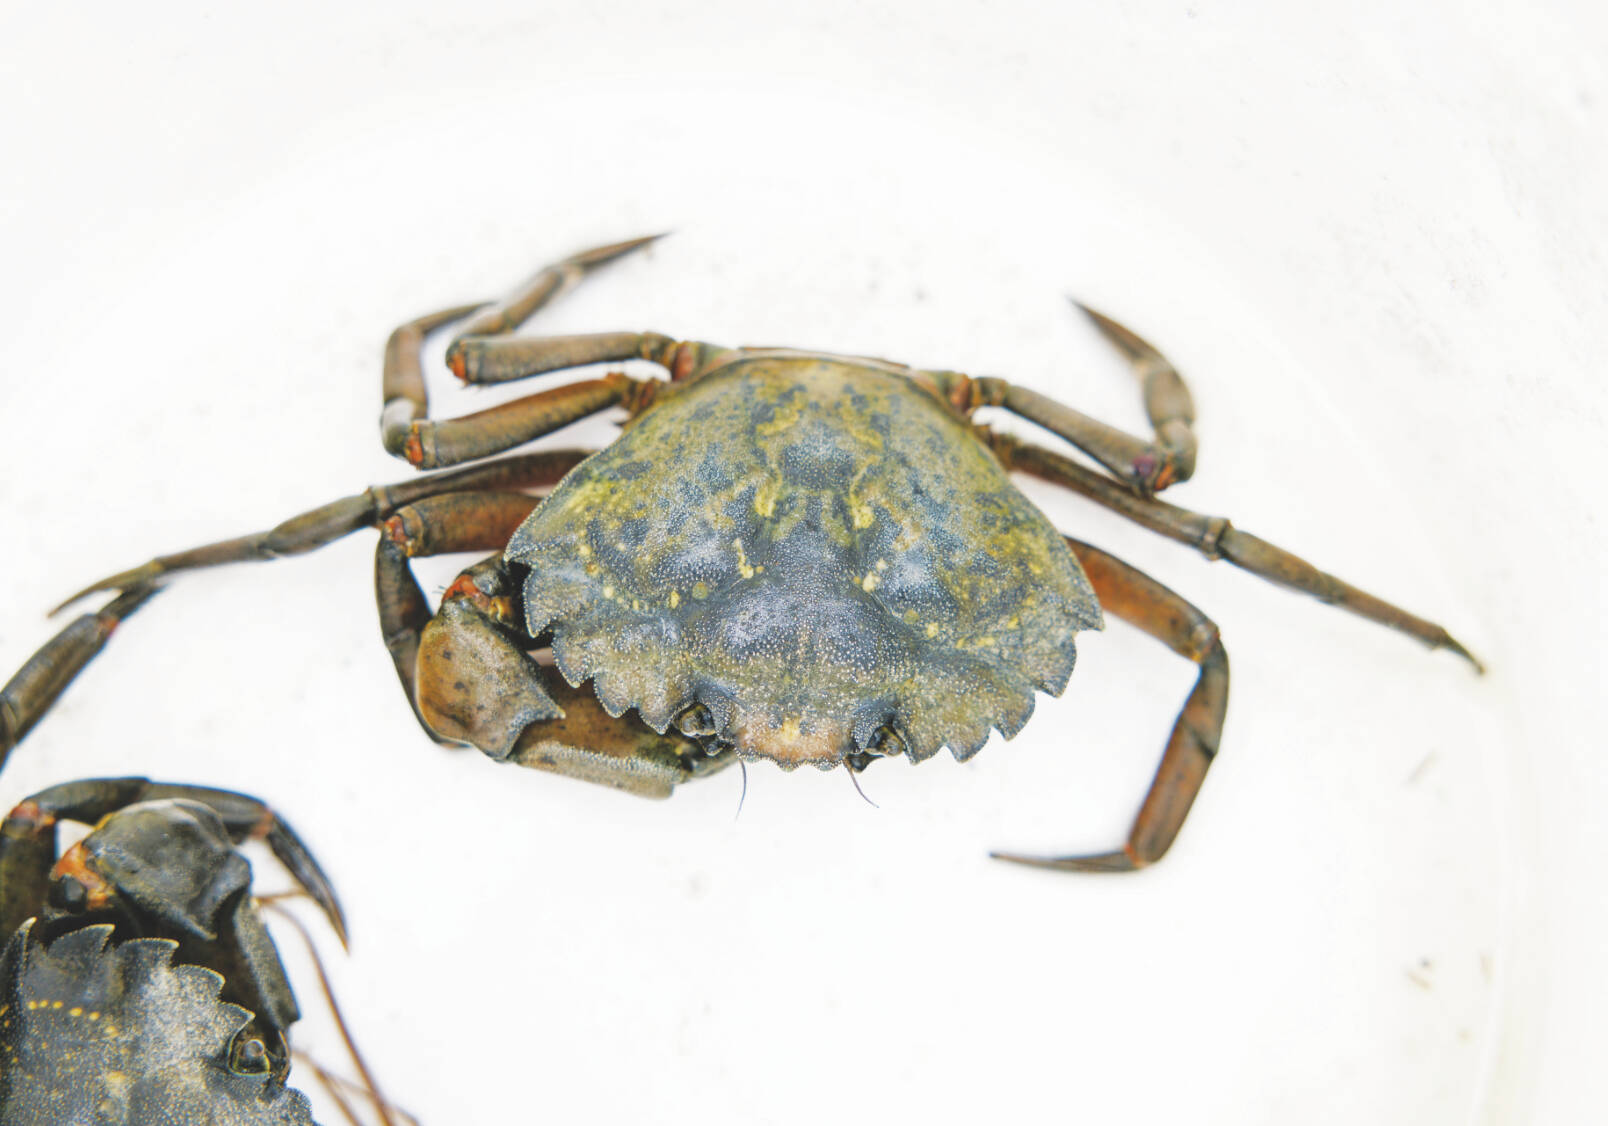 Photo provided by Tammy Davis
European green crabs collected from the Annette Islands Reserve in Metlakatla by ADF&G in 2022.